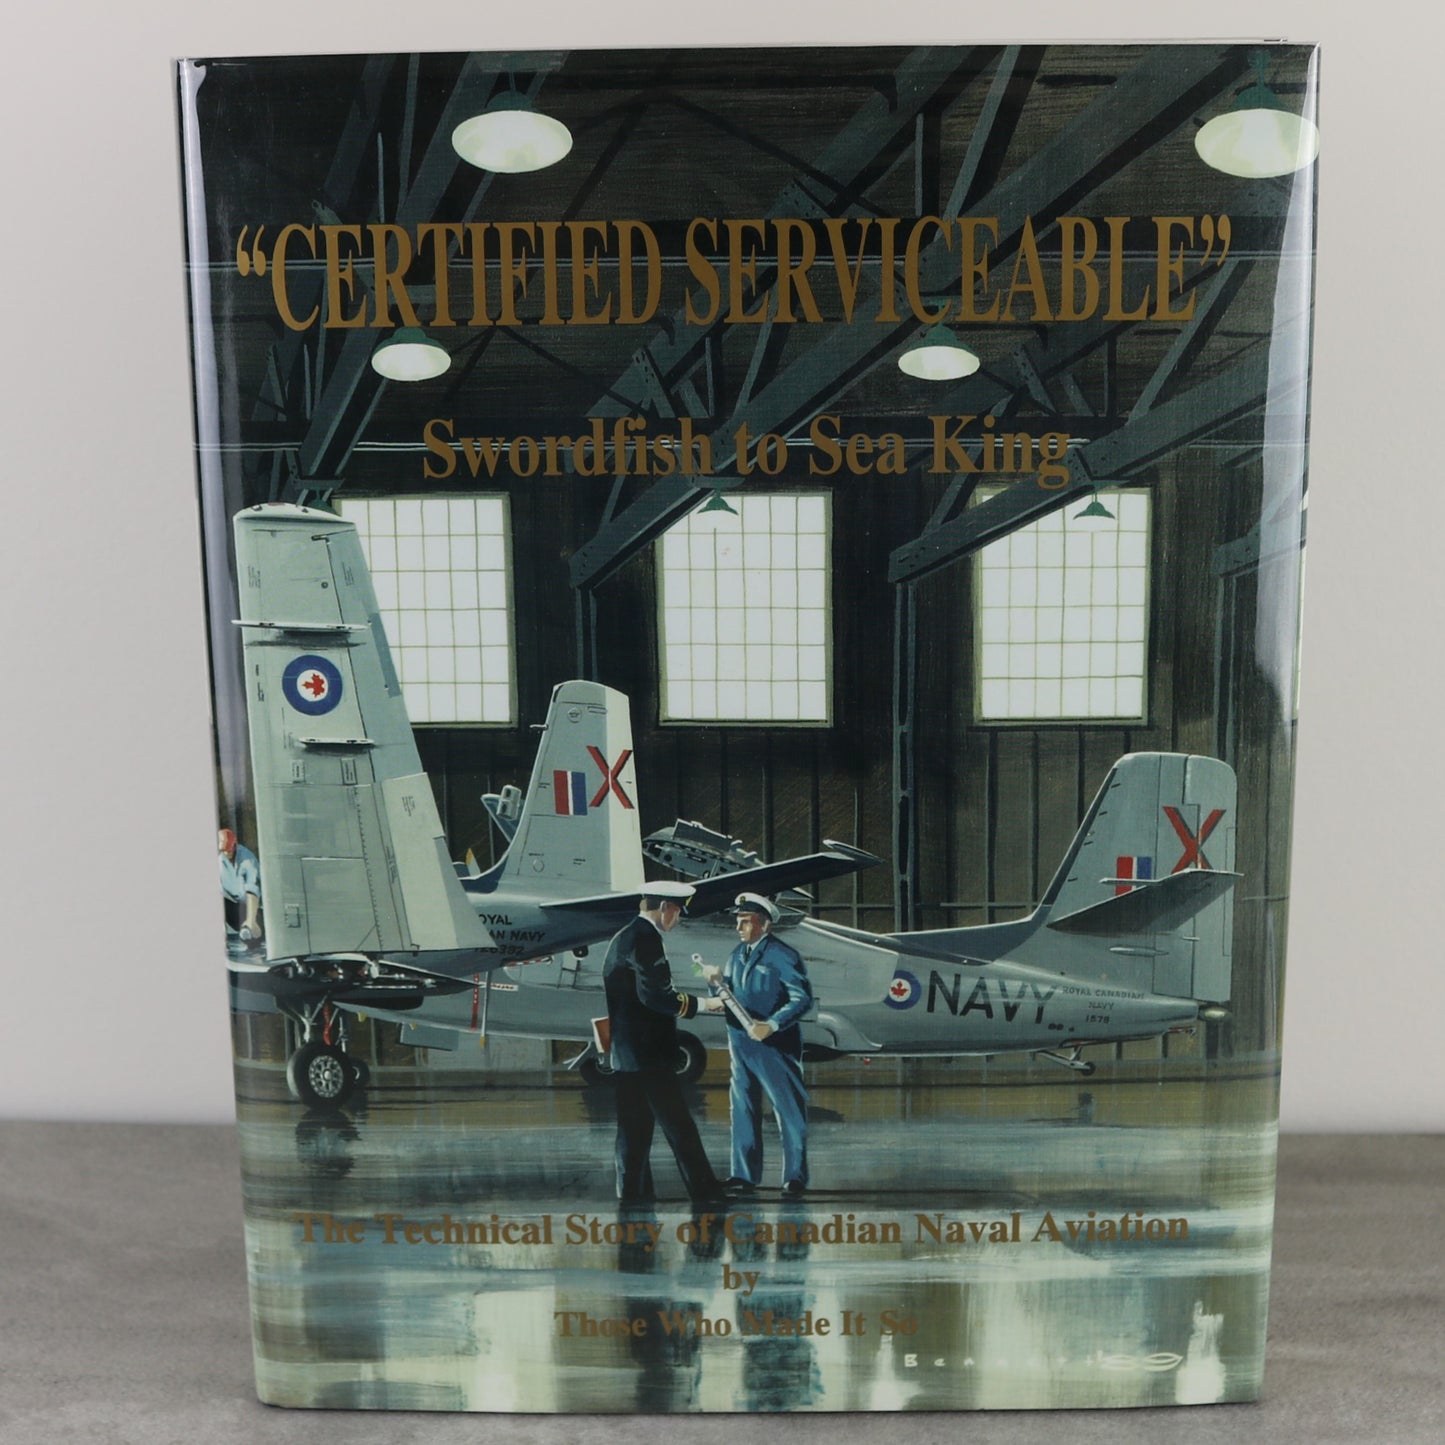 Certified Serviceable Naval Aviation RCAF Canada Military History Used Book